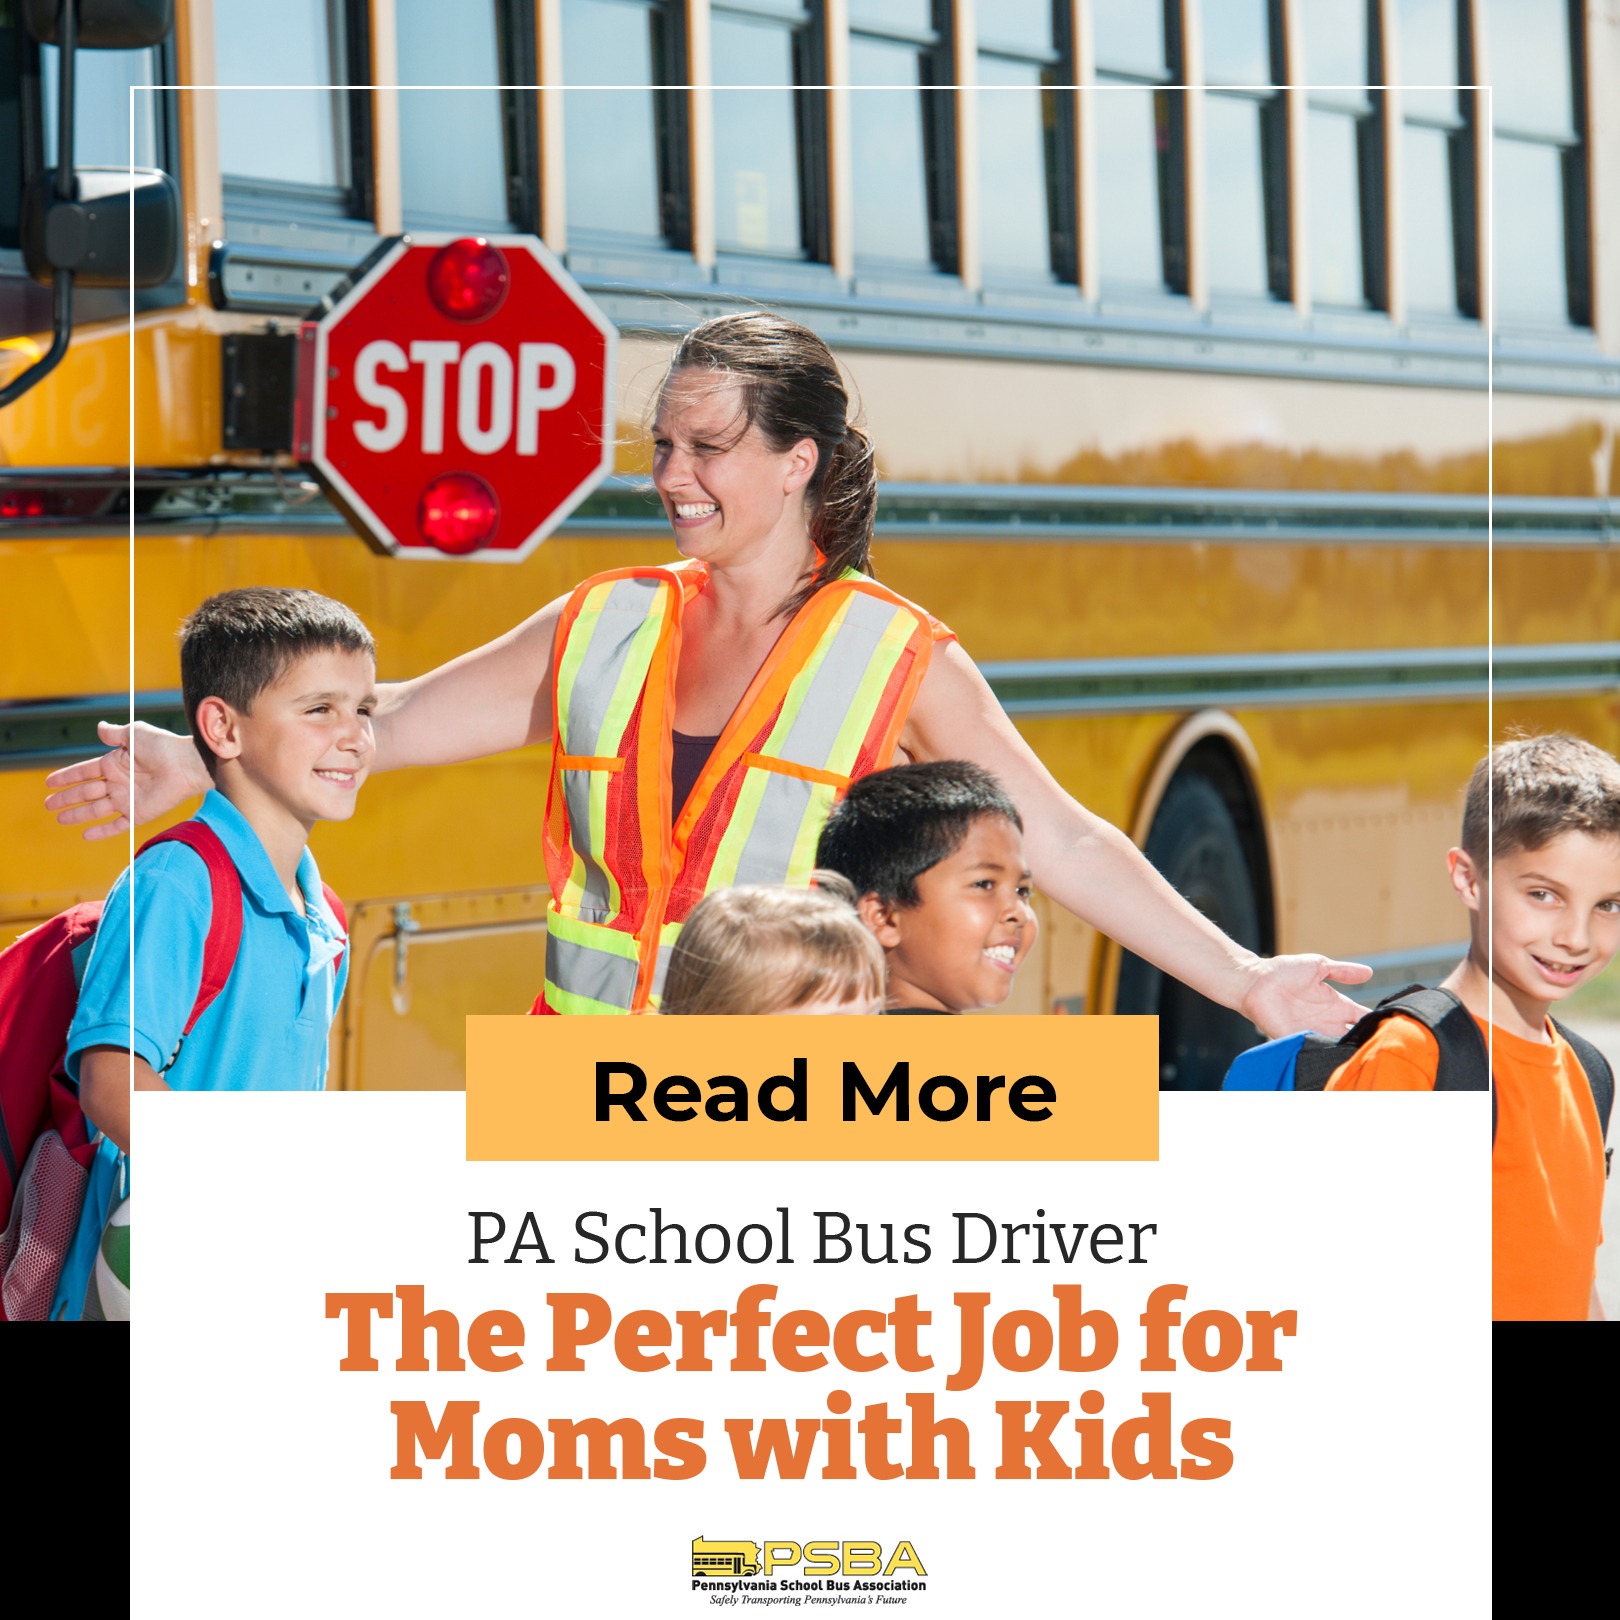 PA School Bus Driver: The Perfect Job for Moms with Kids